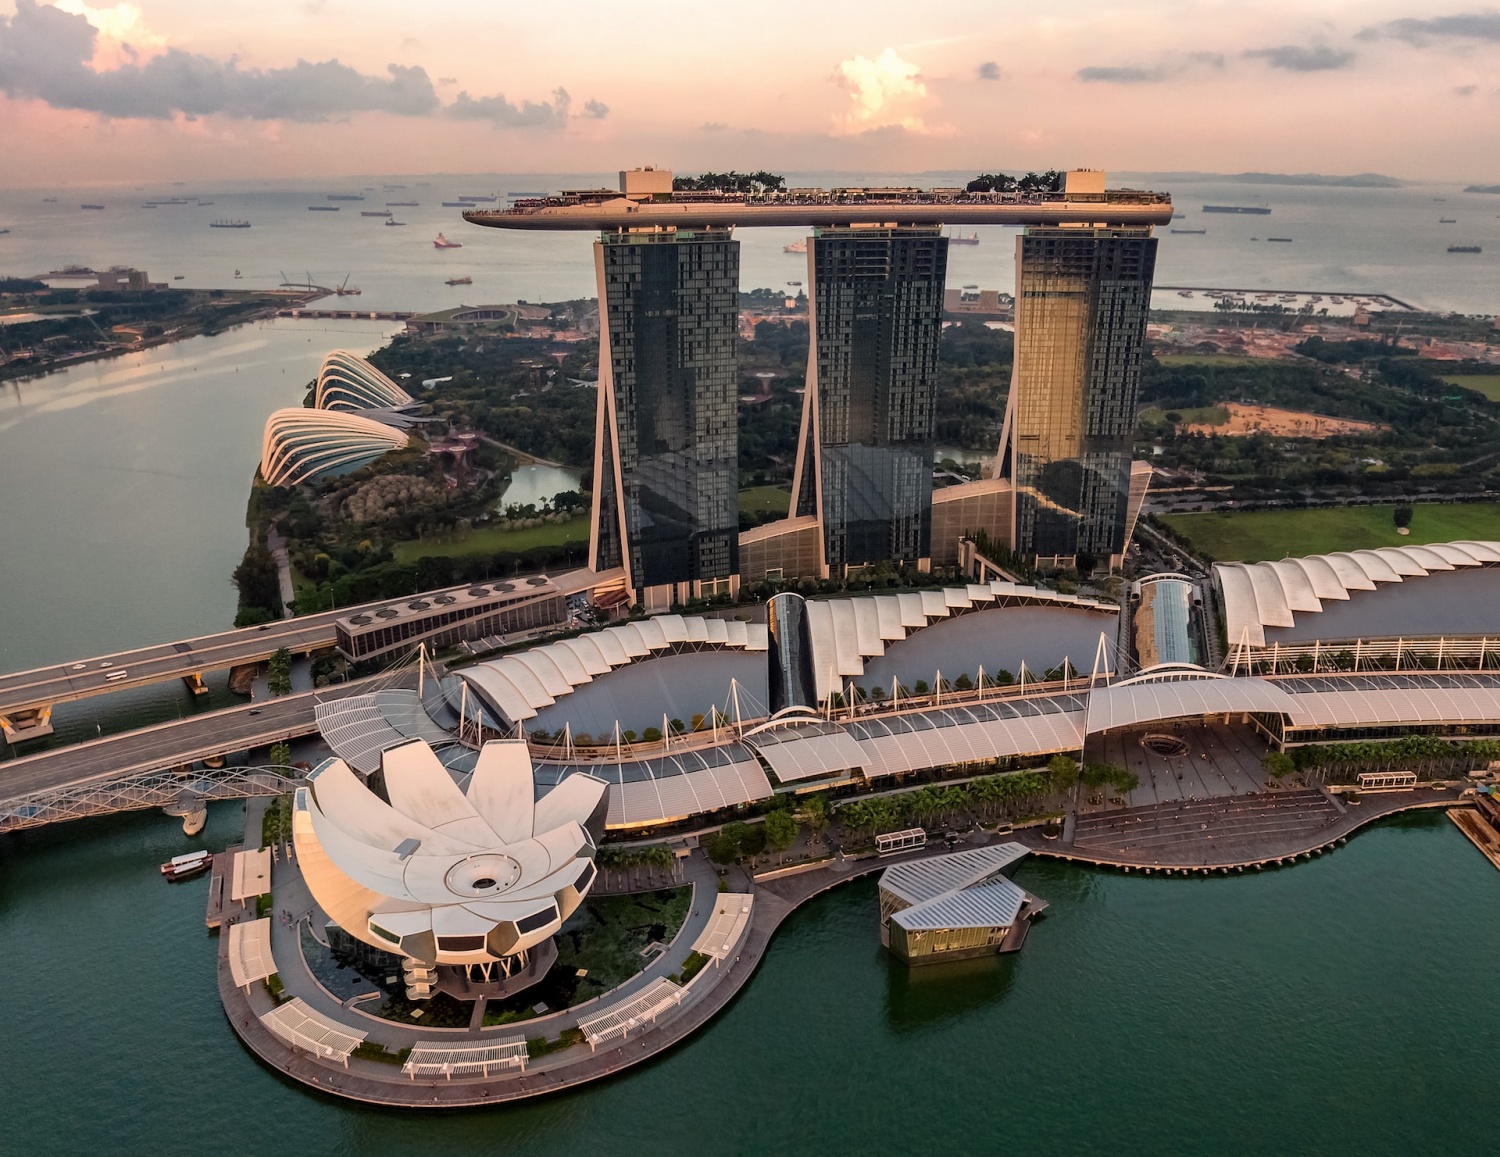 Singapore's Marina Bay Sands Data Breach: Over 660,000 Customers Affected